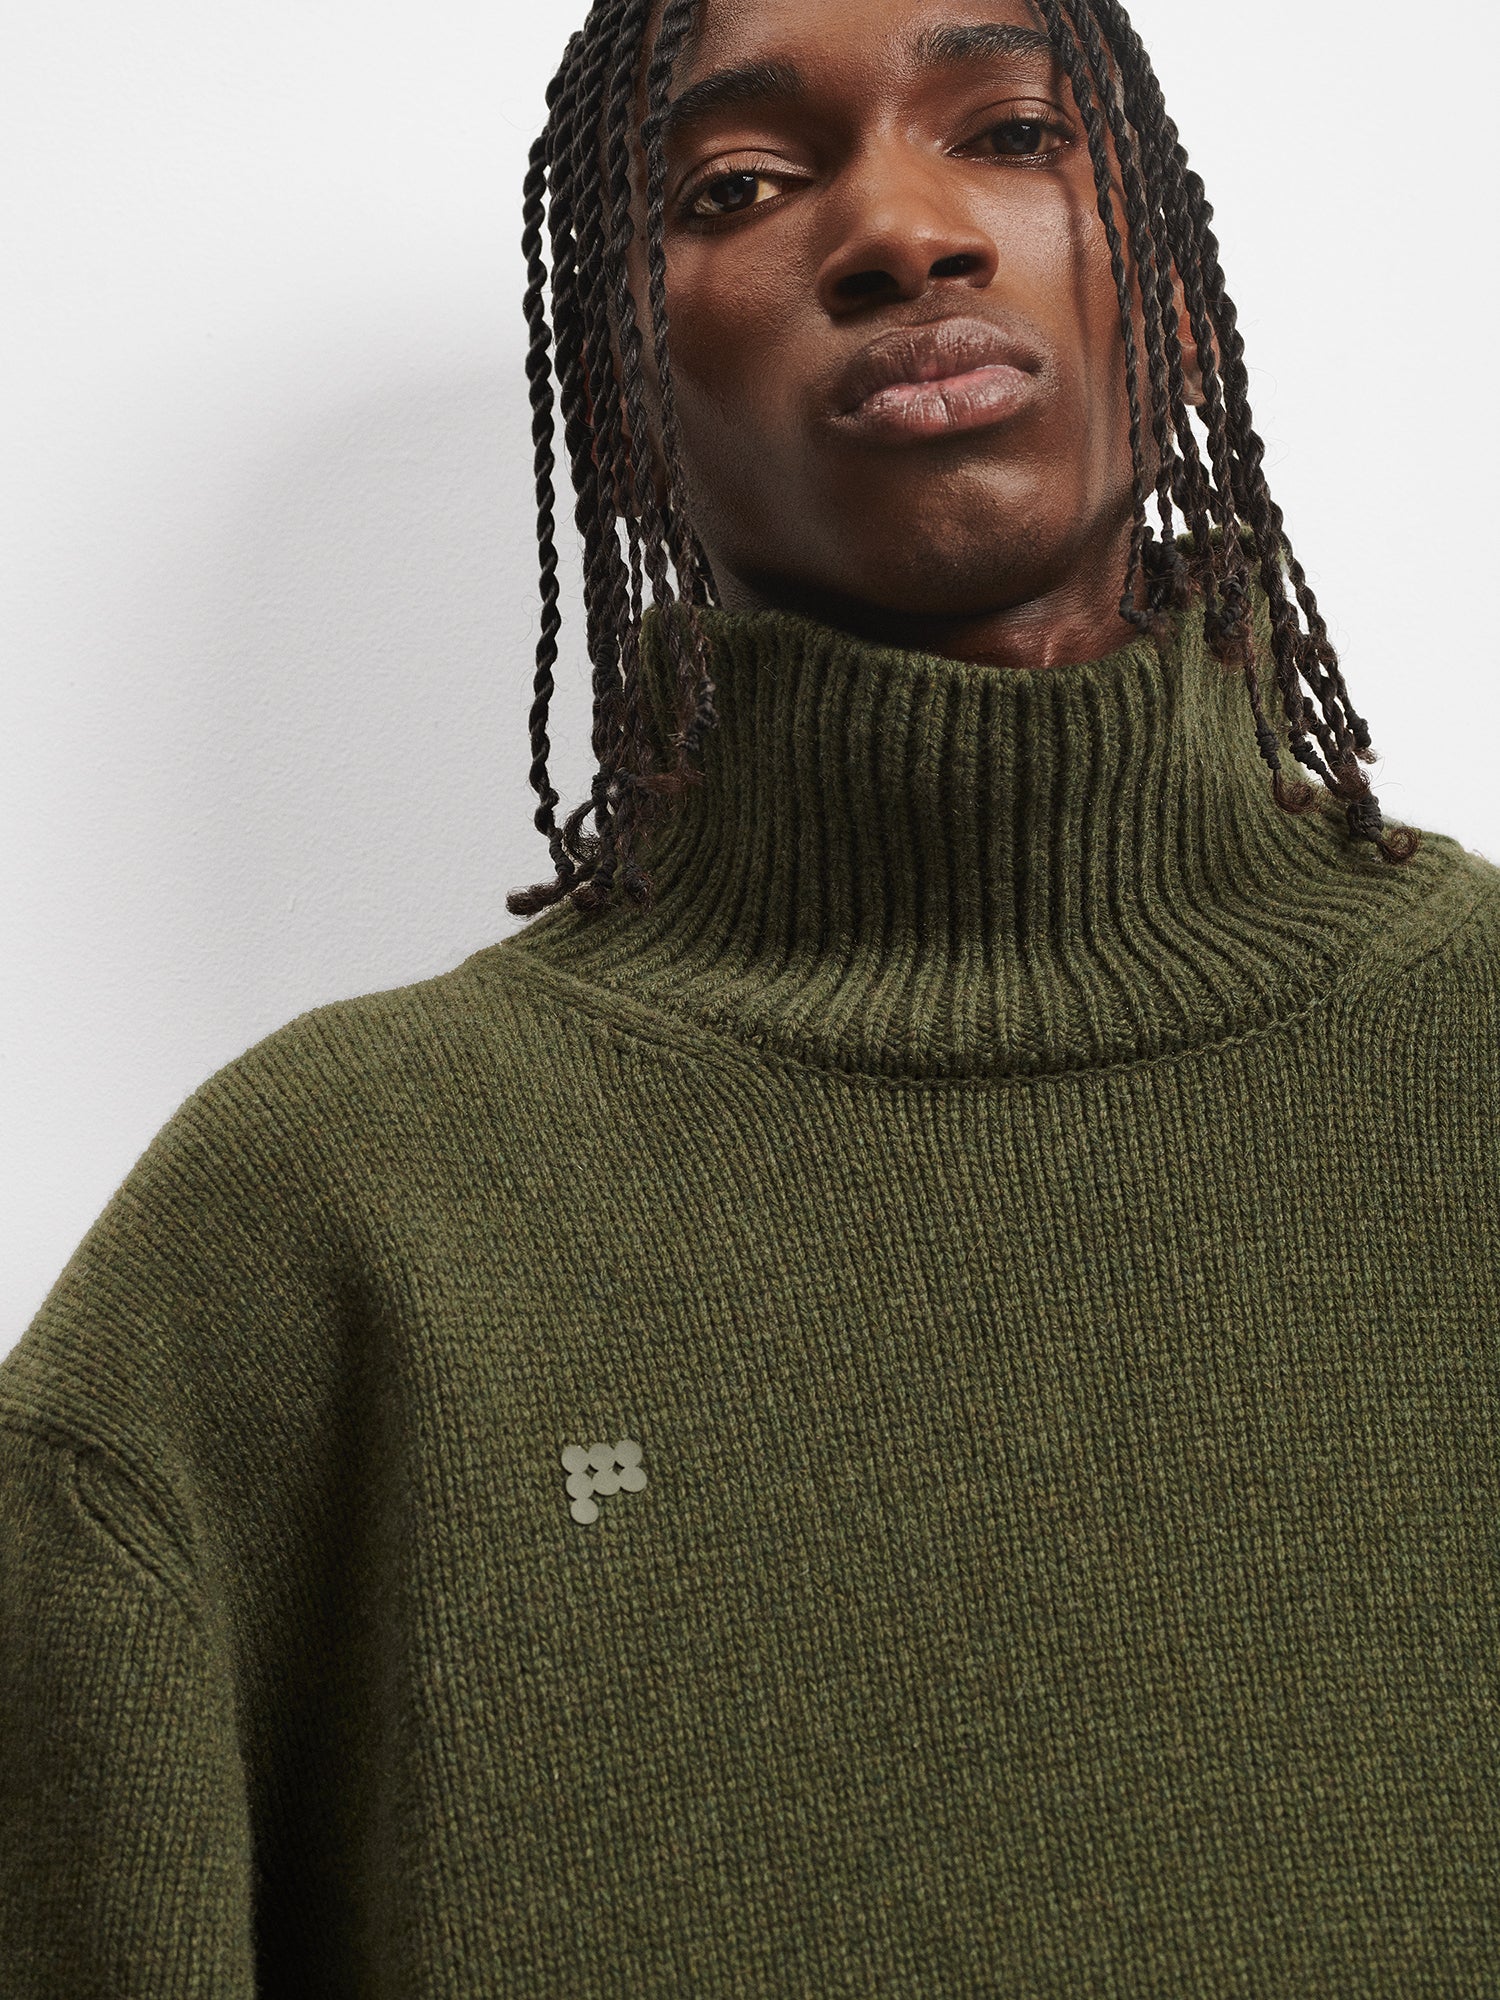 Men's Recycled Cashmere Turtleneck Sweater - Rosemary Green - Pangaia